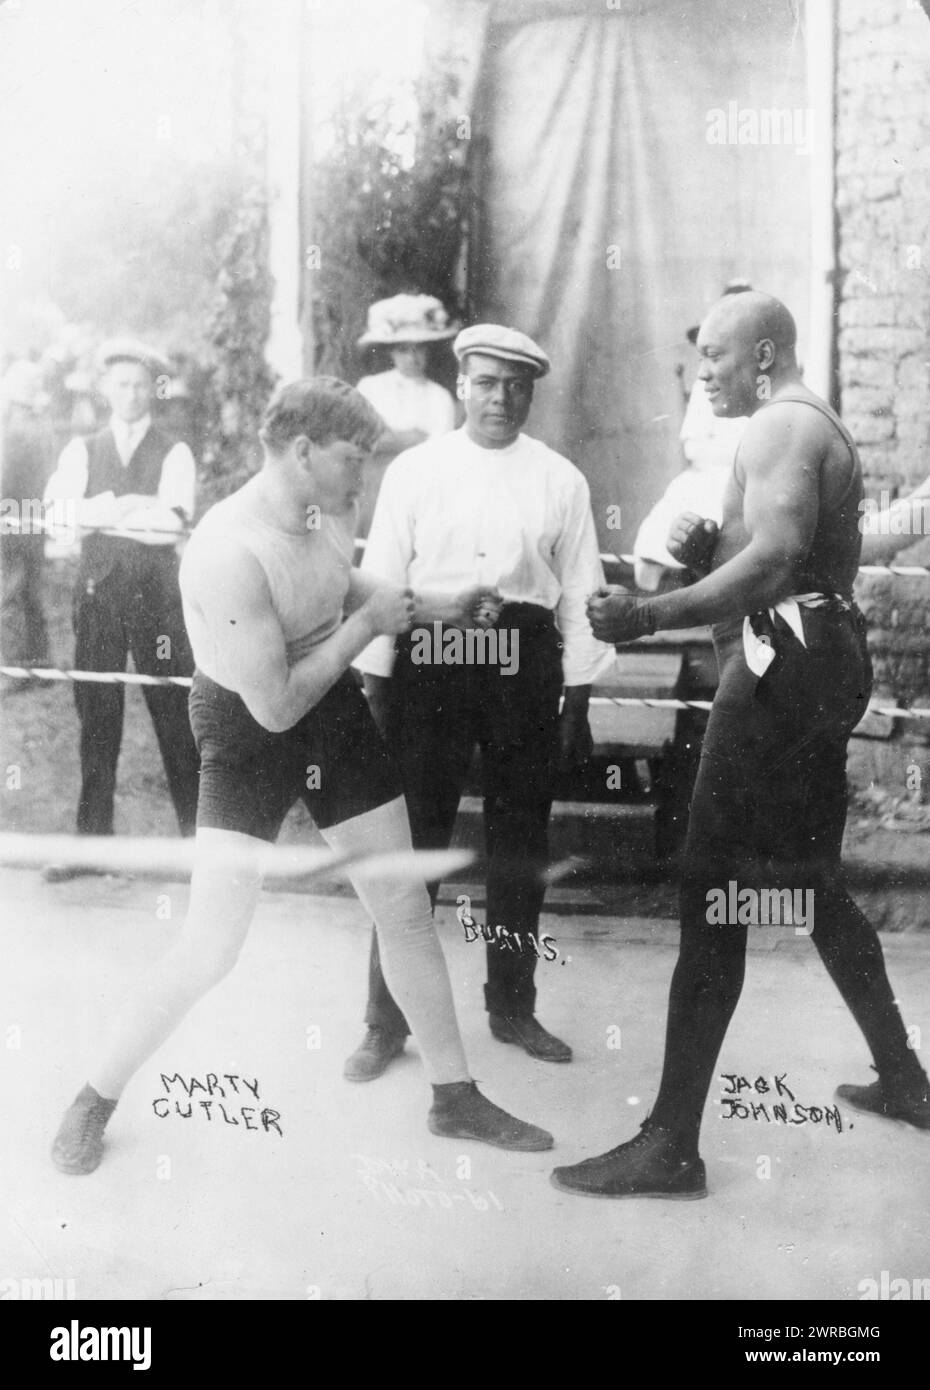 Boxers Marty Cutler and Jack Johnson in ring, with Burns, referee(?), D.W.A. photo-61., 1914 June 19, Johnson, Jack, 1878-1946, Photographic prints, 1910-1920., Photographic prints, 1910-1920, 1 photographic print Stock Photo